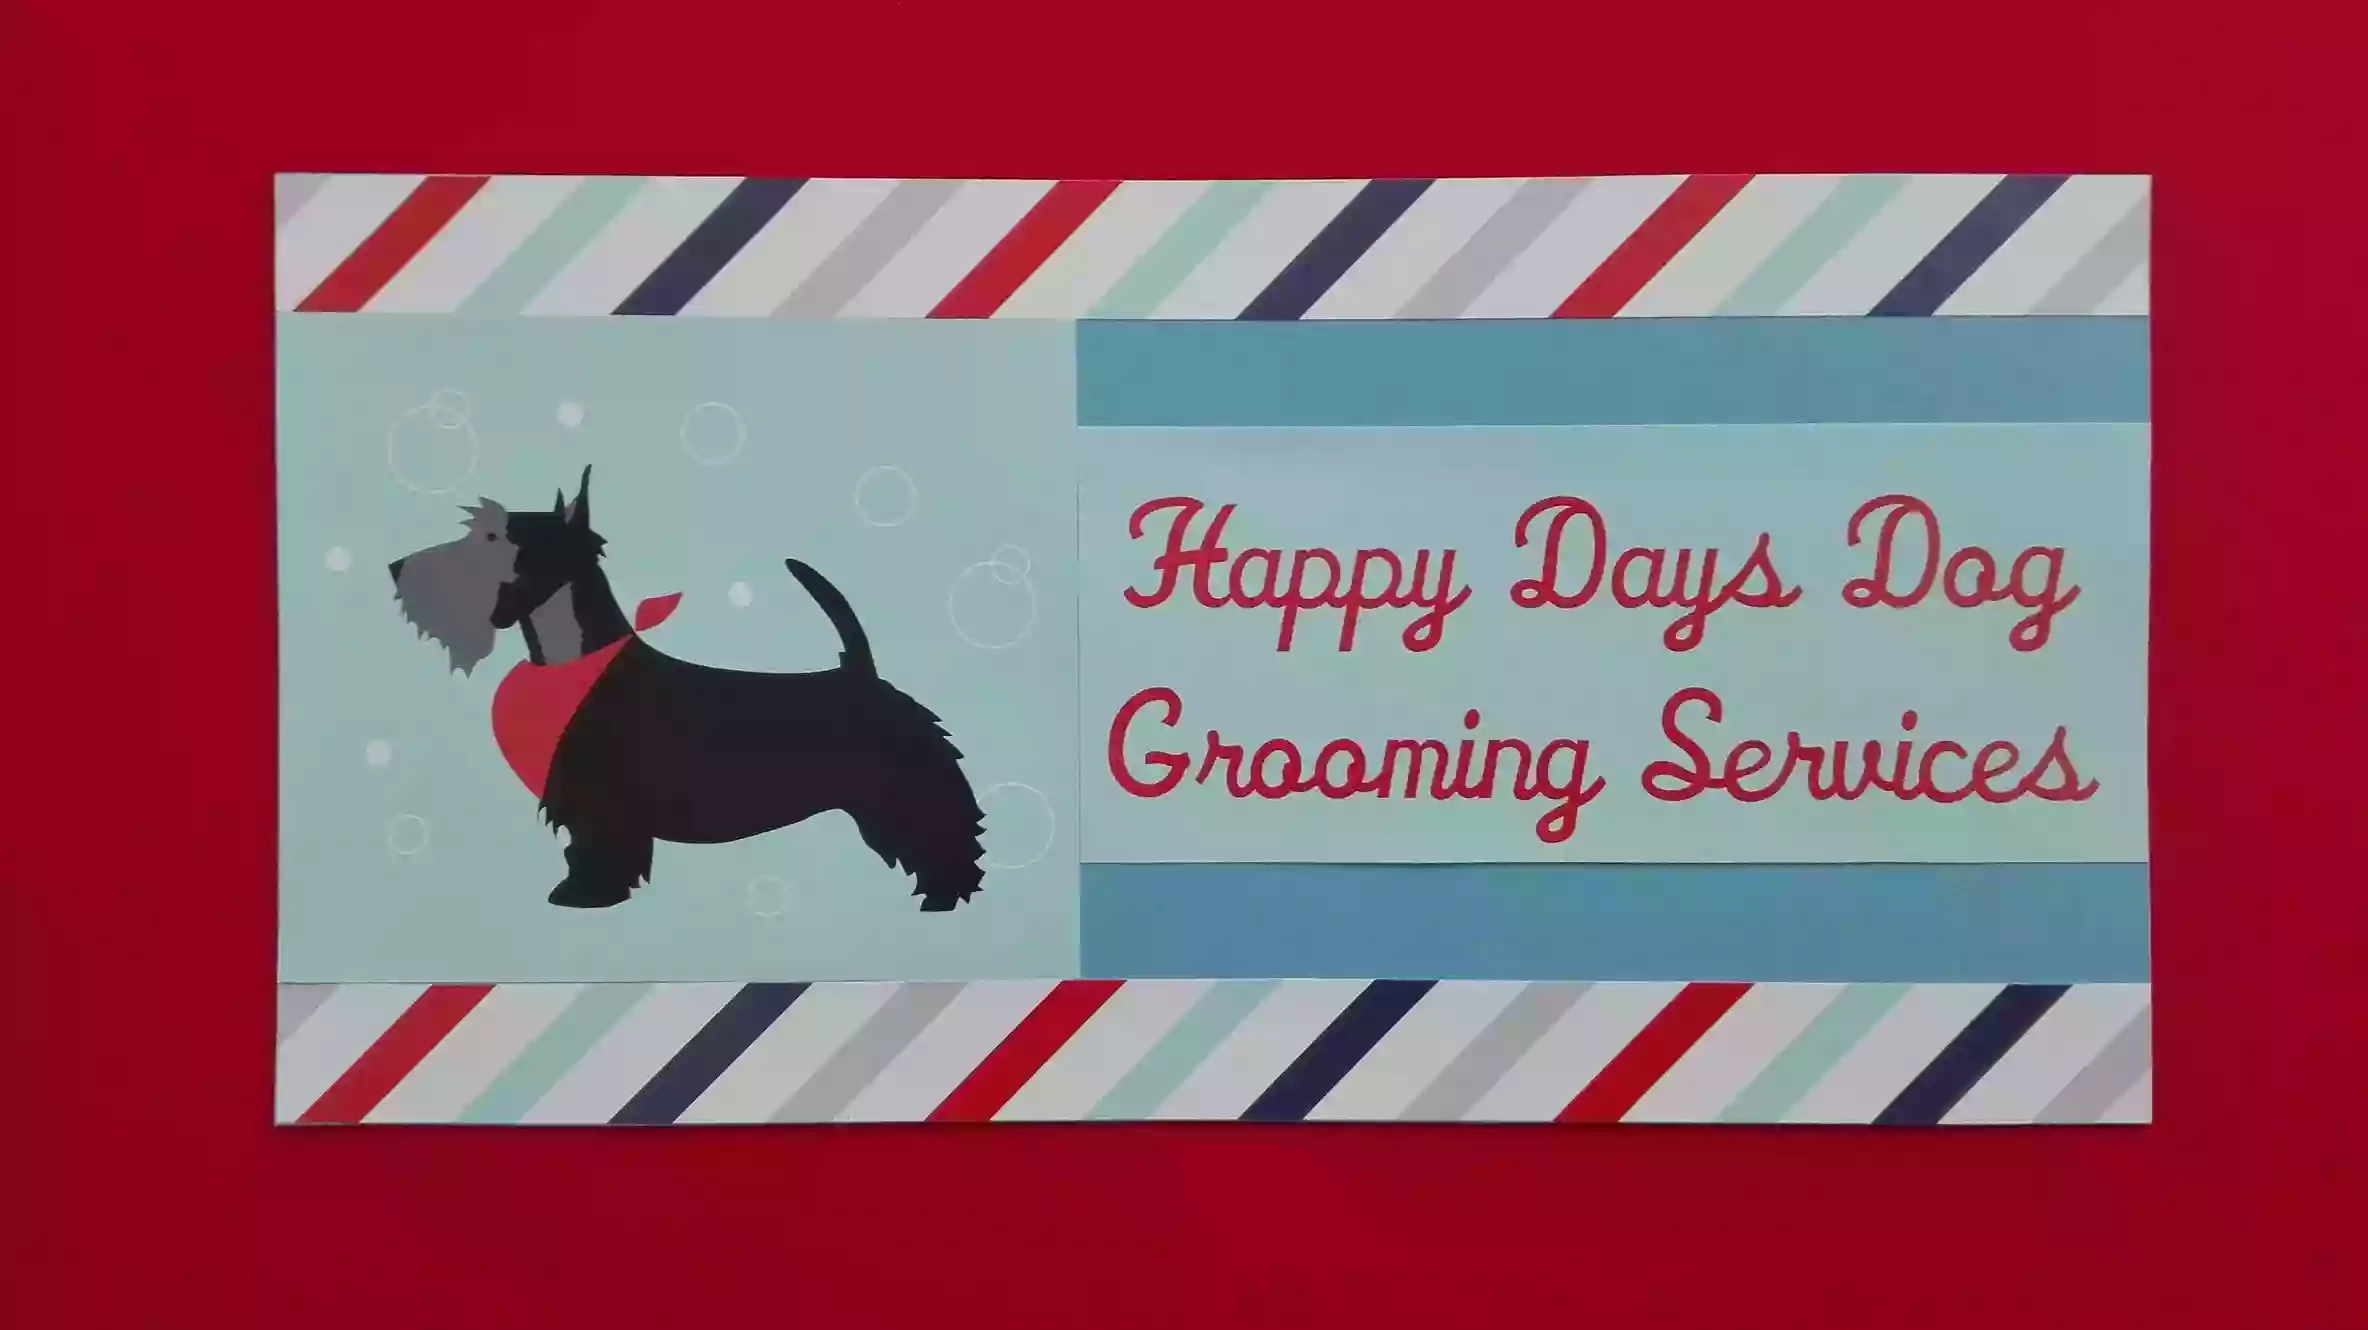 Happy Days Dog Grooming Services